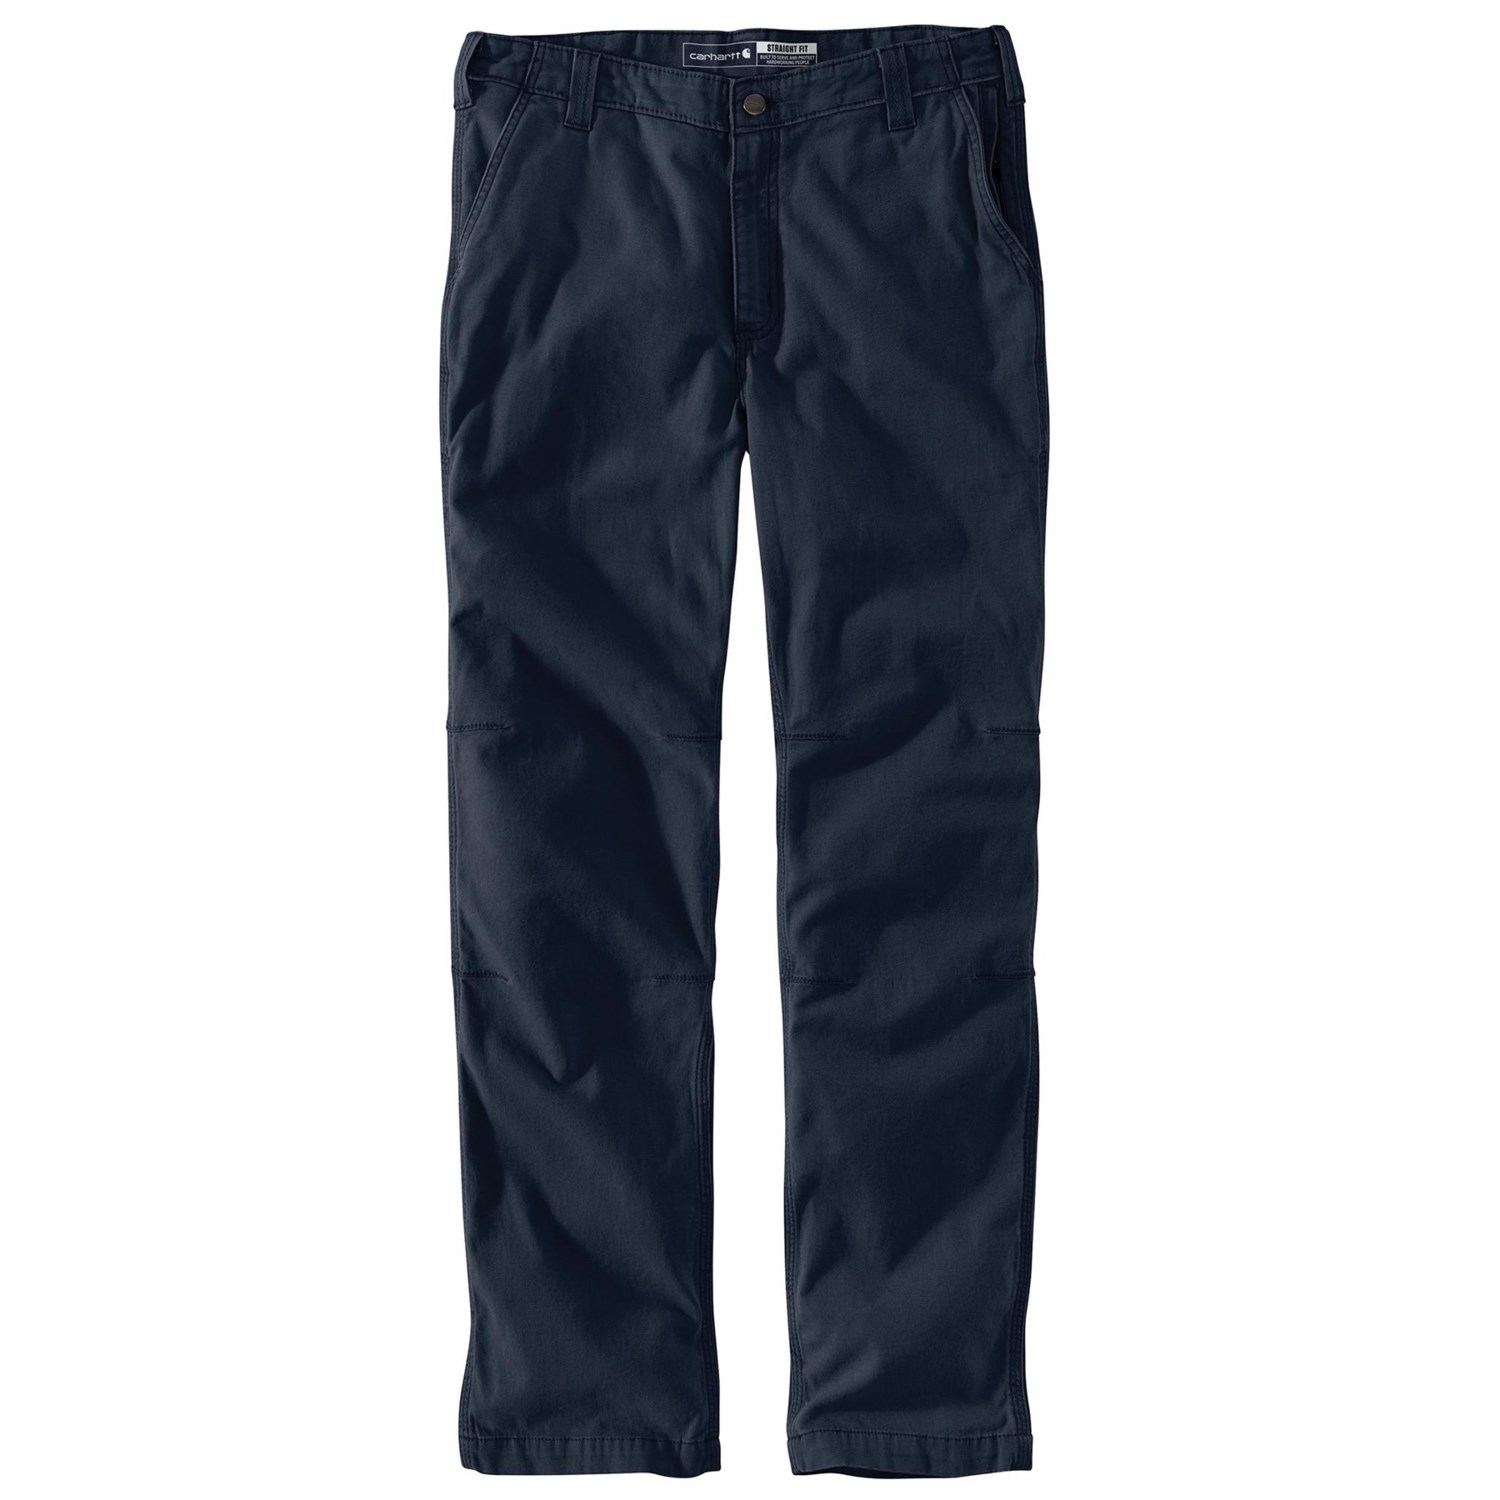 Carhartt 102821 Rugged Flex® Rigby Pants - Straight Fit, Factory Seconds